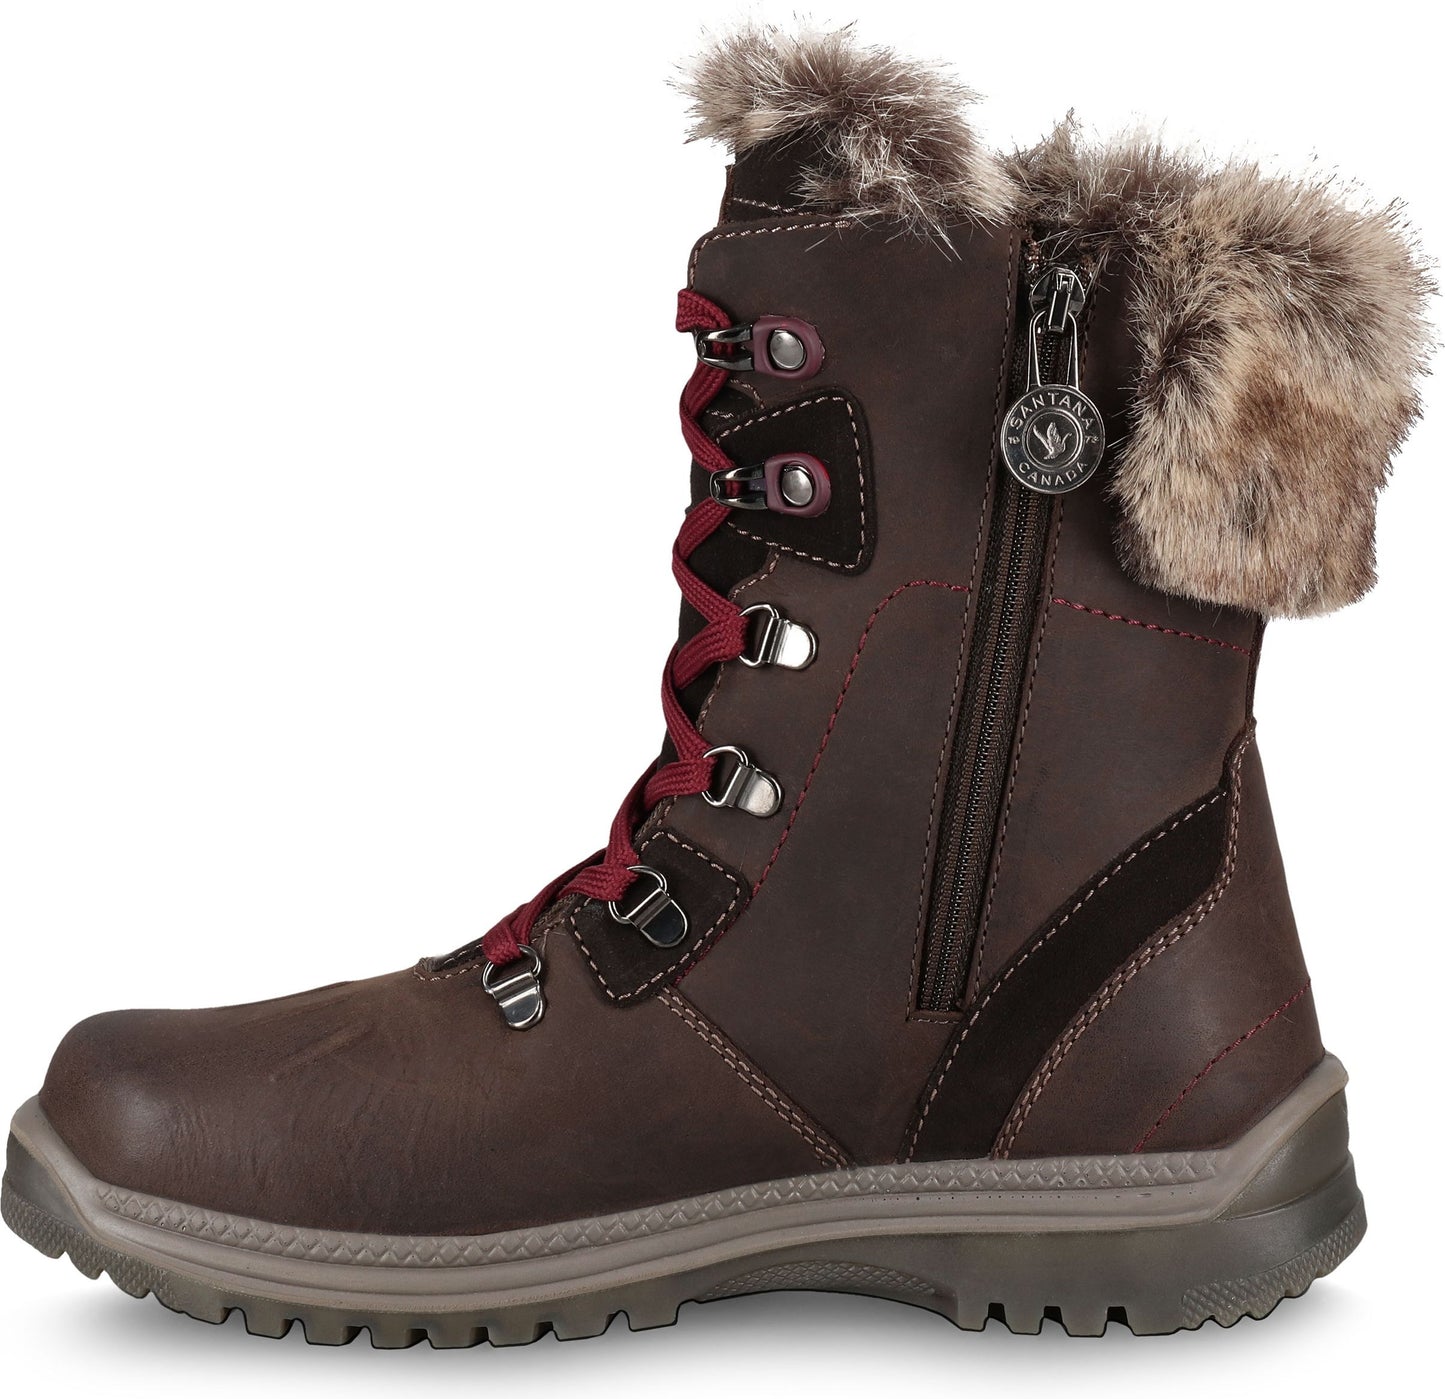 Santana Canada Boots Milly Leather Brown Burgundy